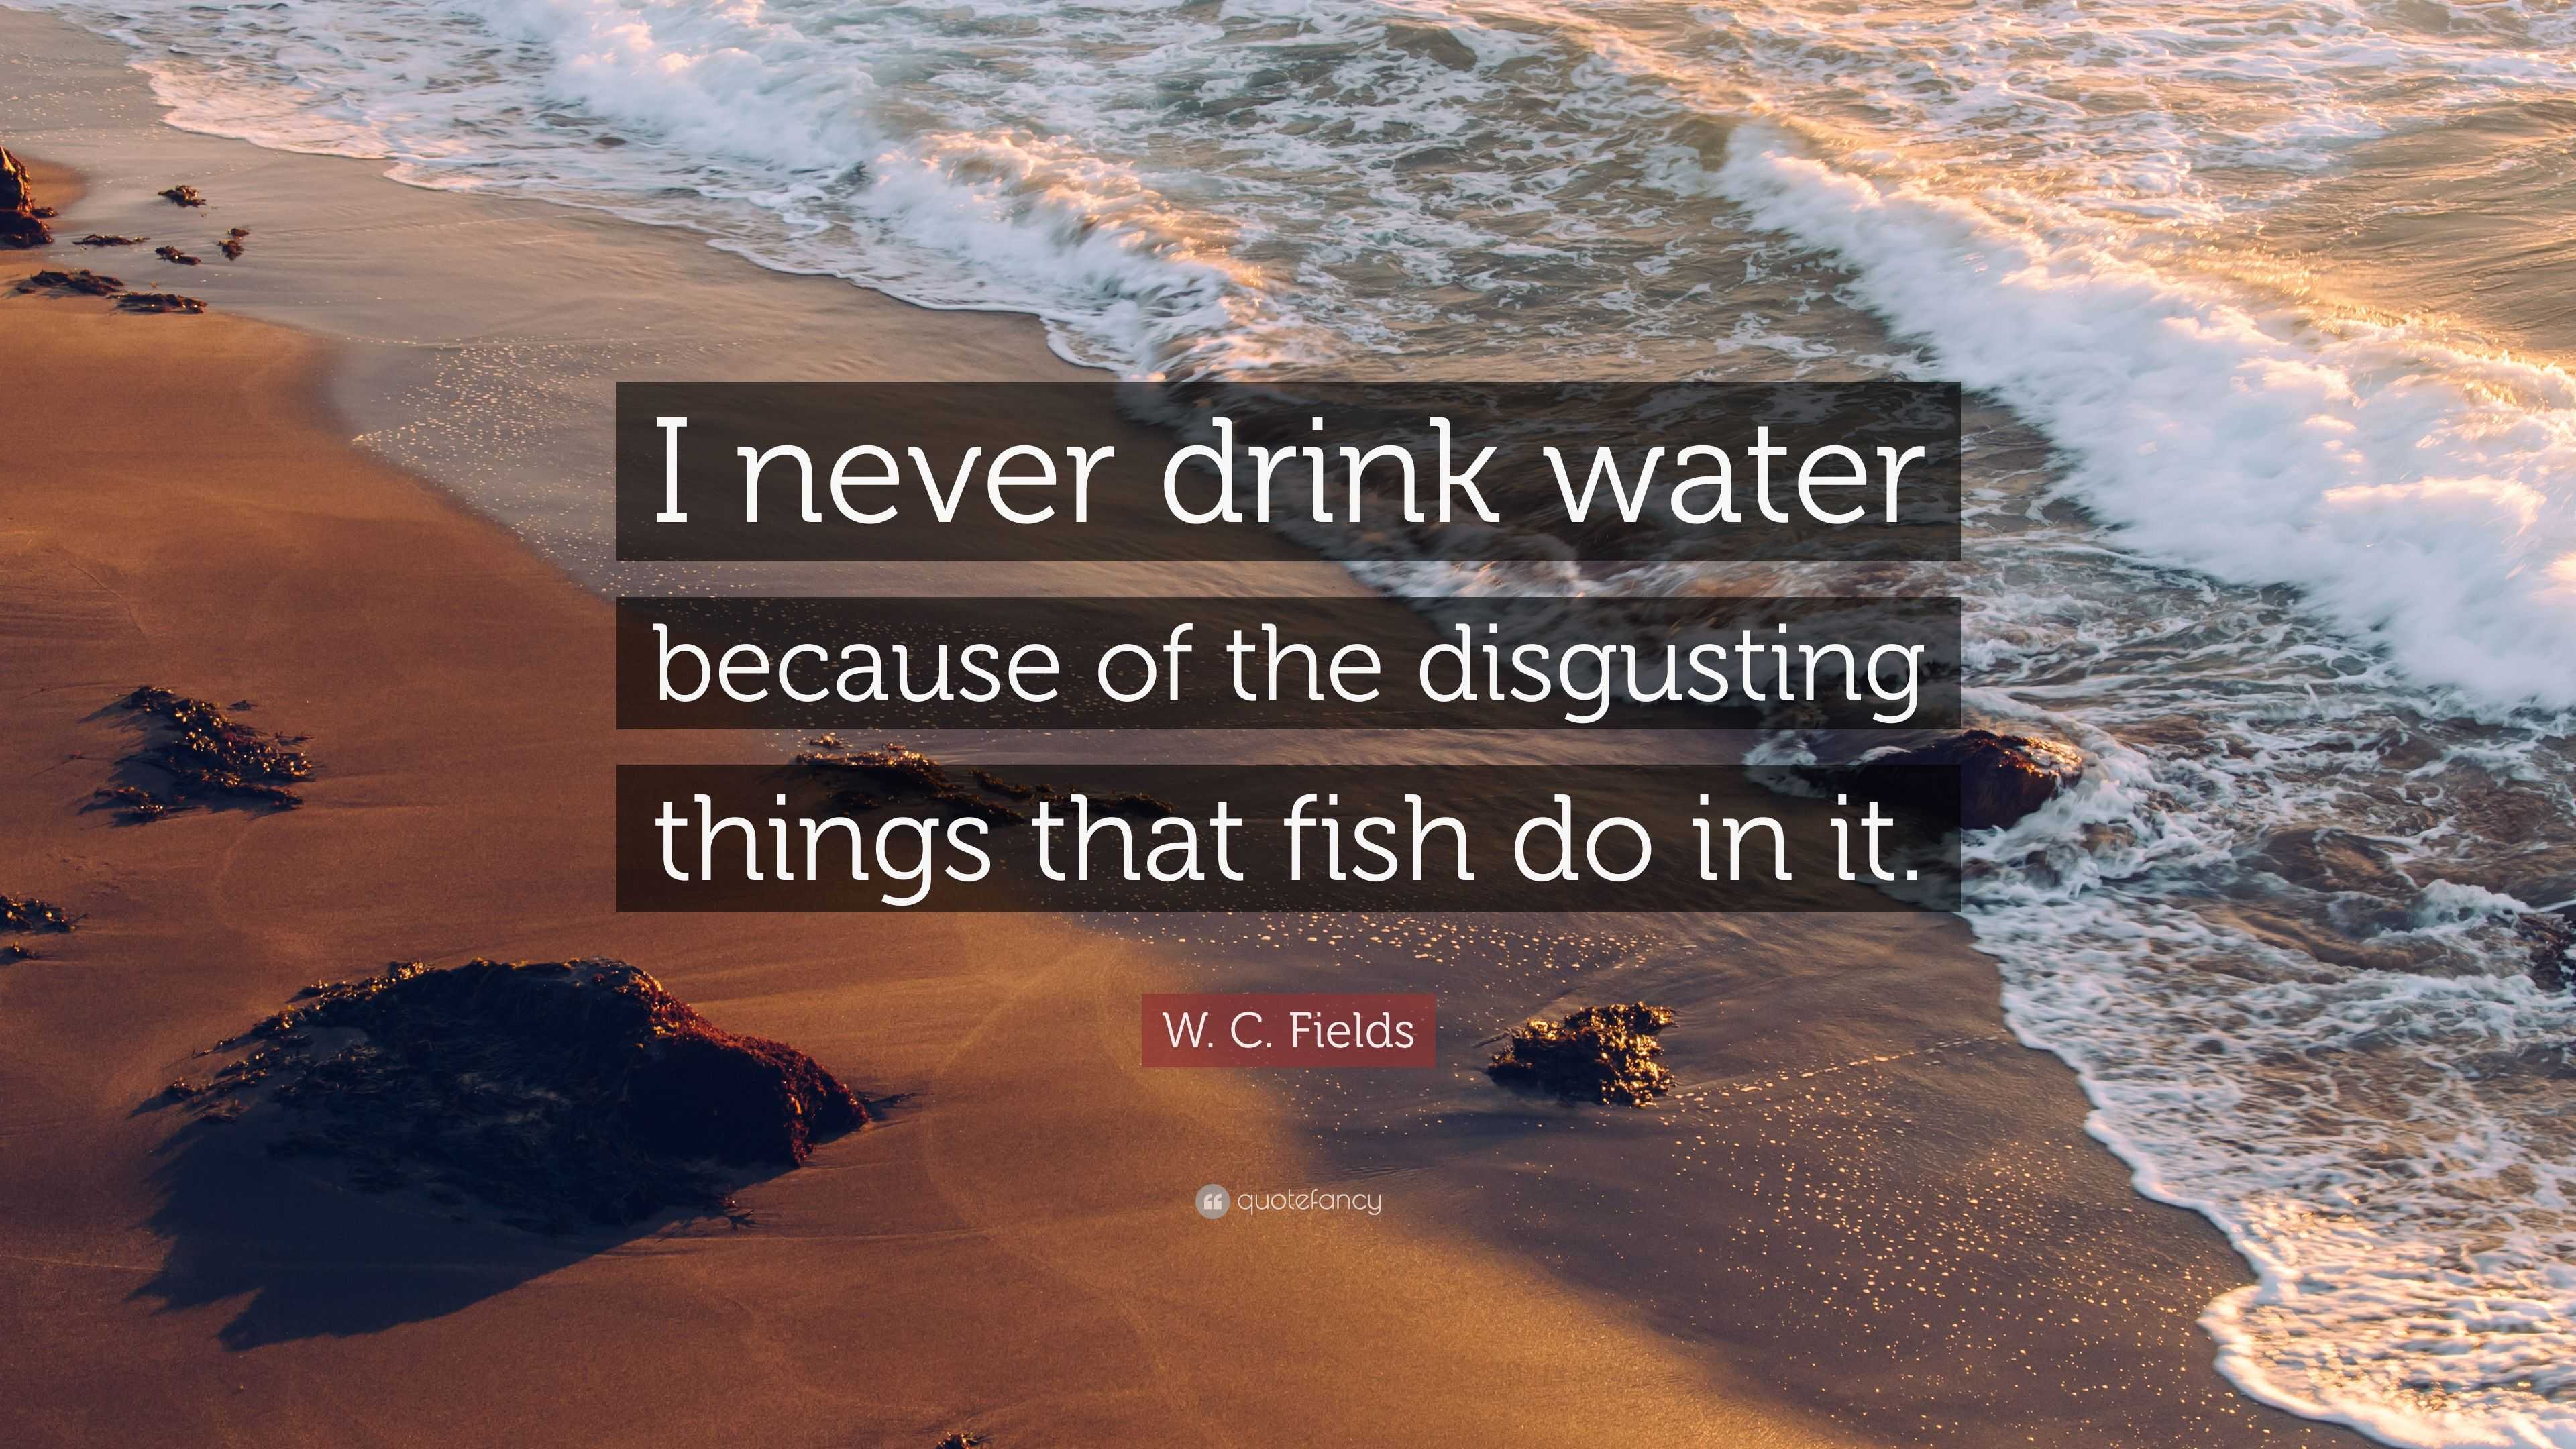 W. C. Fields Quote: “I never drink water because of the disgusting ...